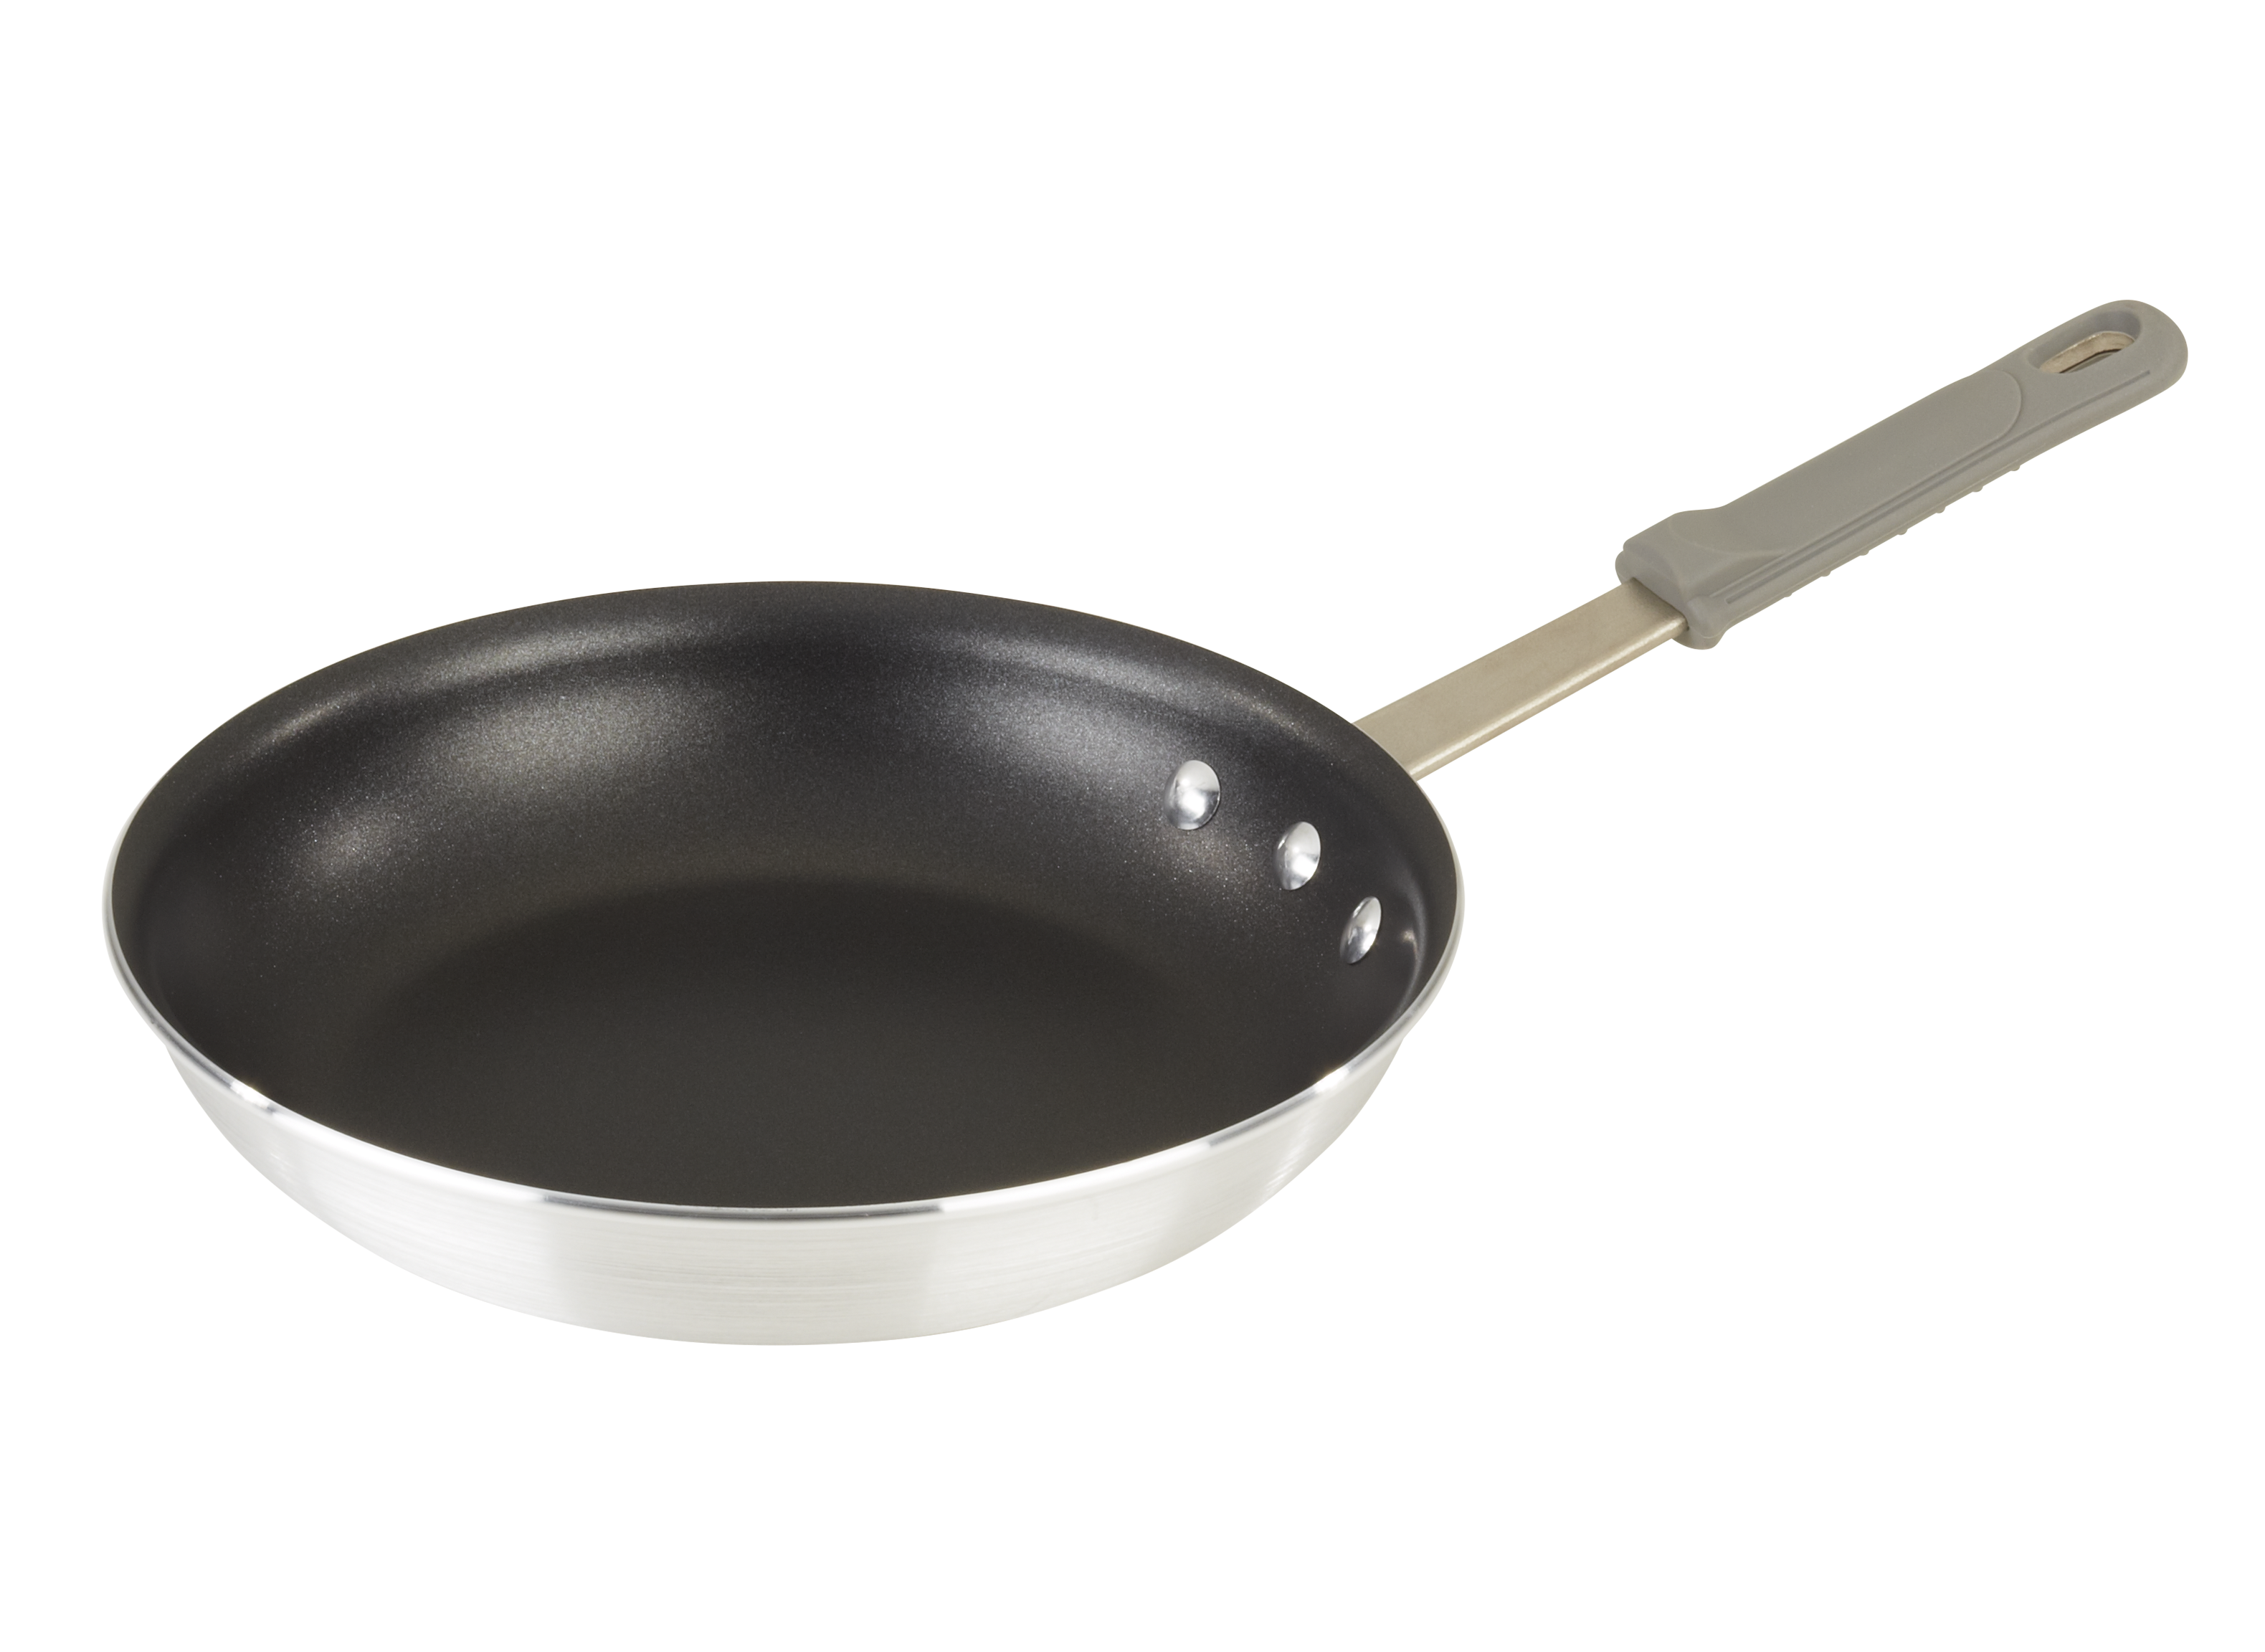 https://crdms.images.consumerreports.org/prod/products/cr/models/393383-fryingpans-dailychefsamsclub-80114545item533545nonstick.png